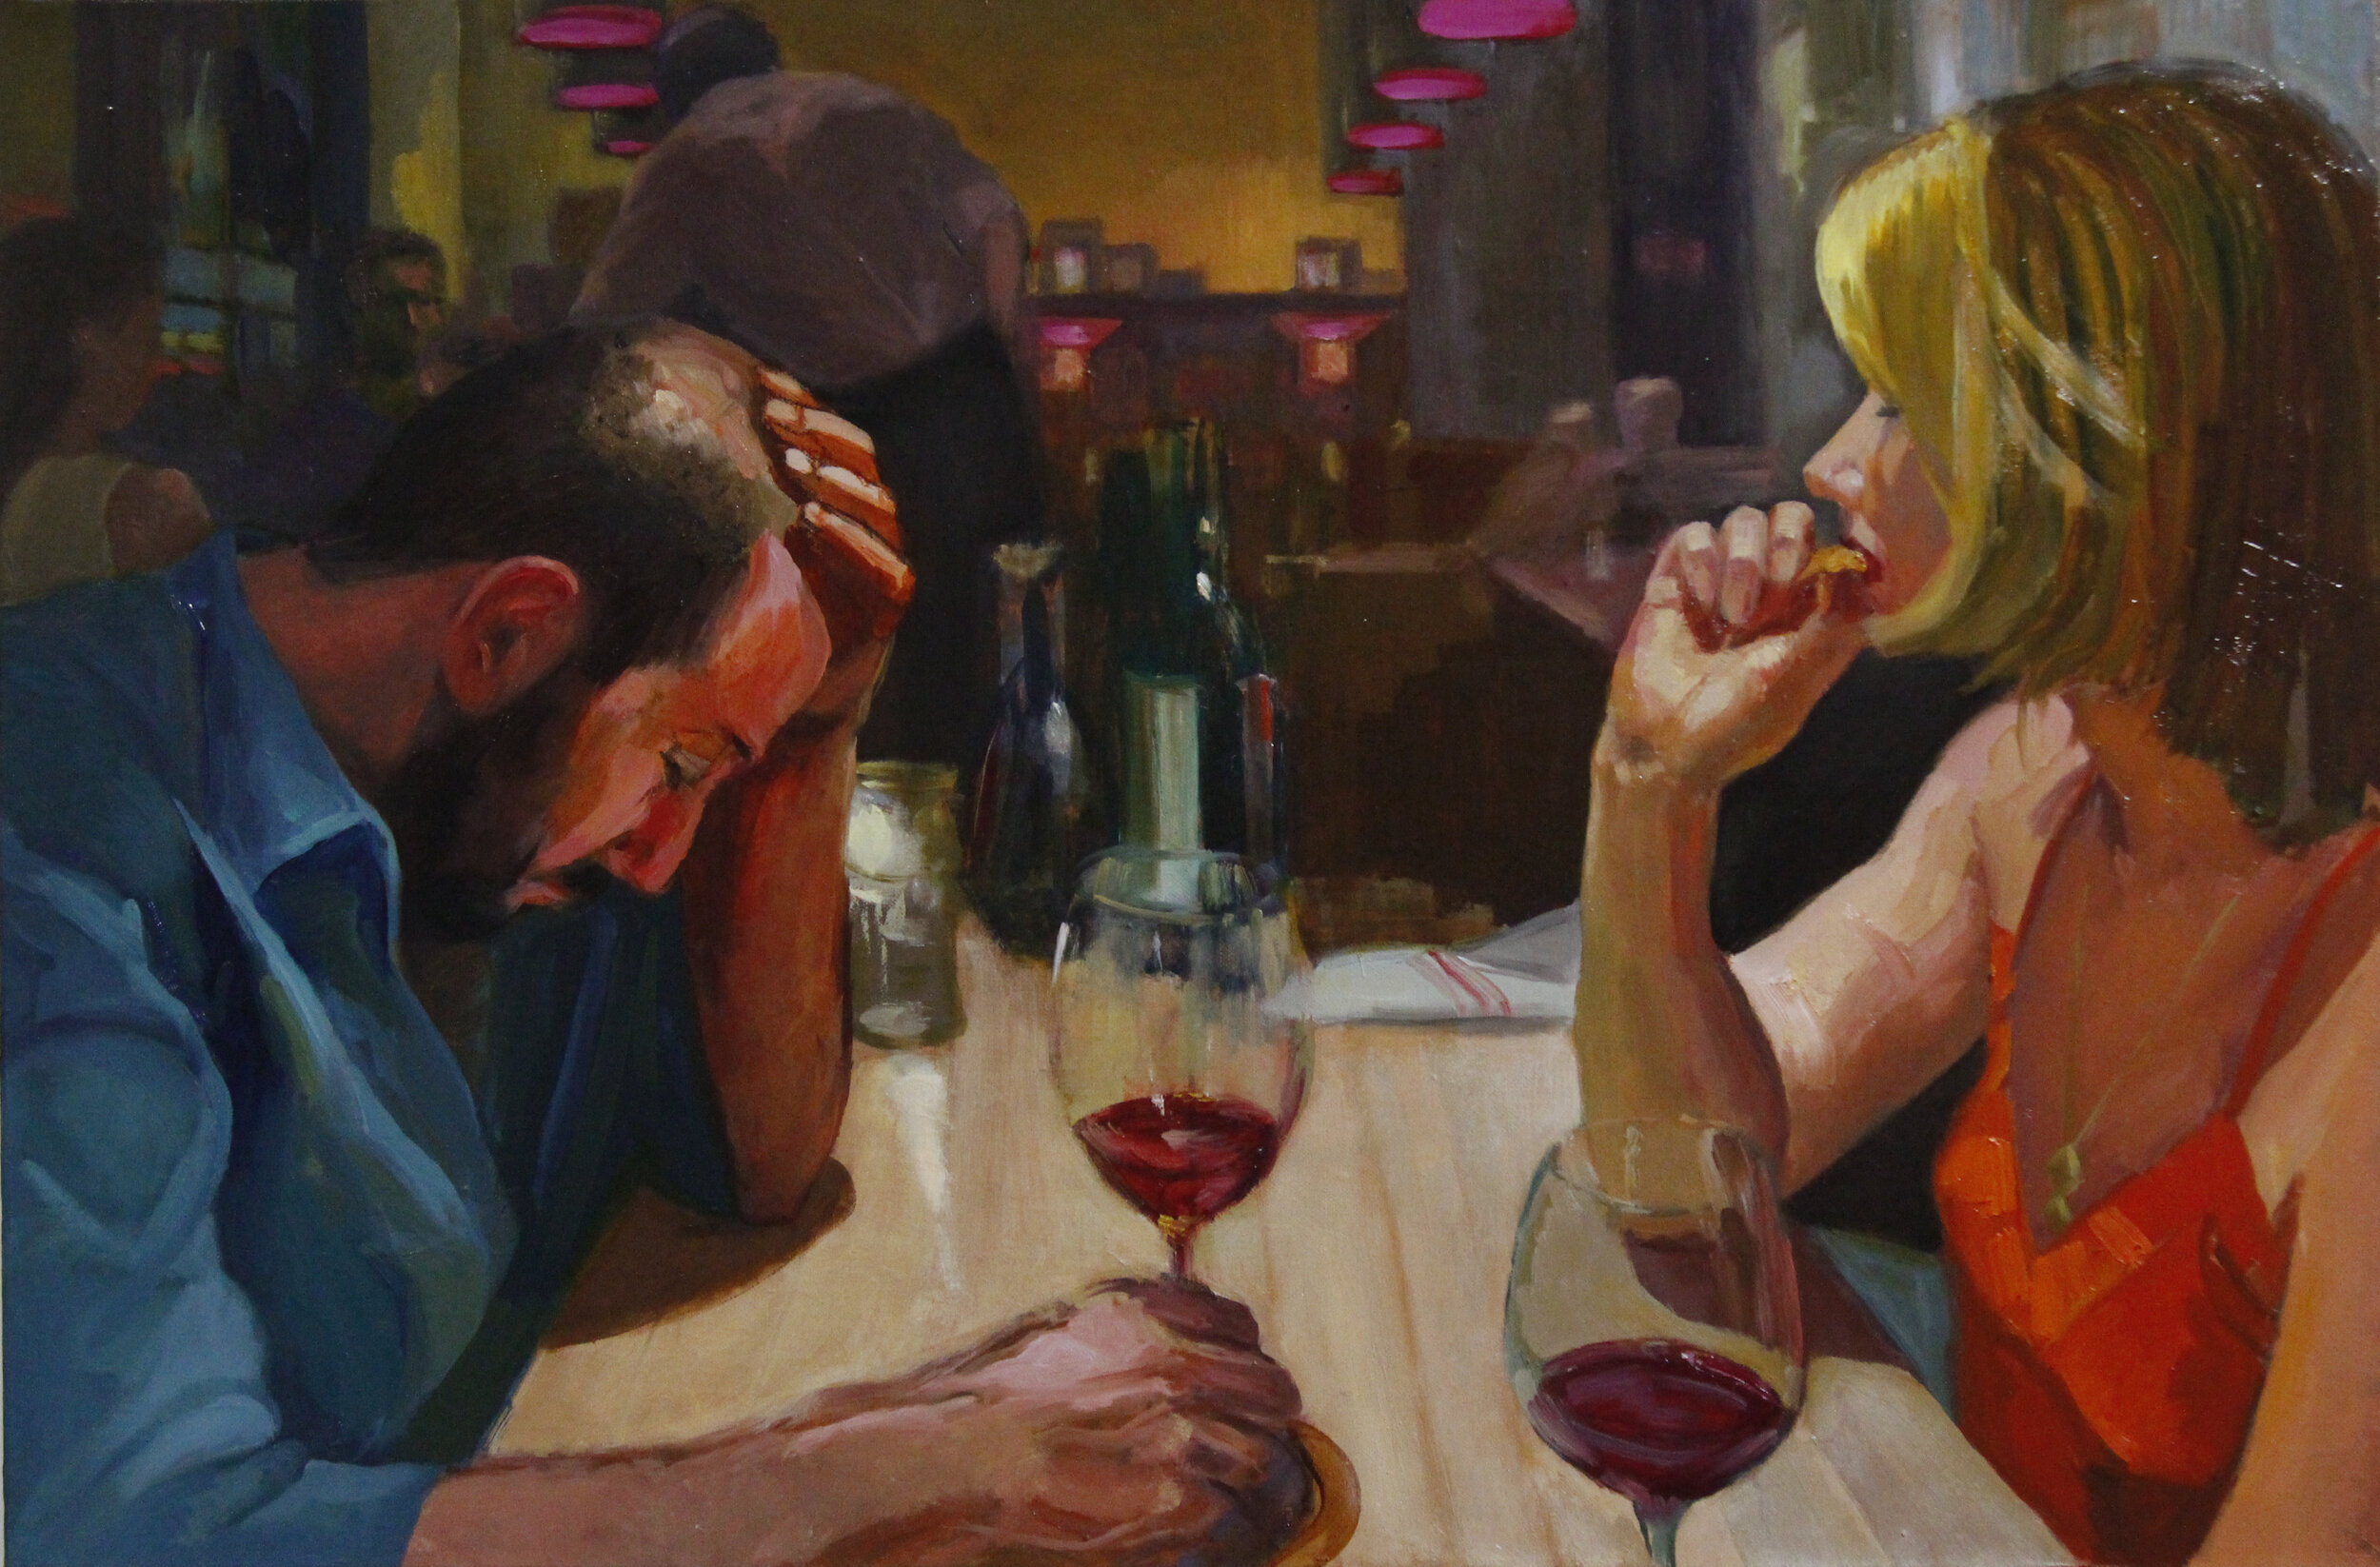 The Date, 2019, oil on linen, 20x30 inches